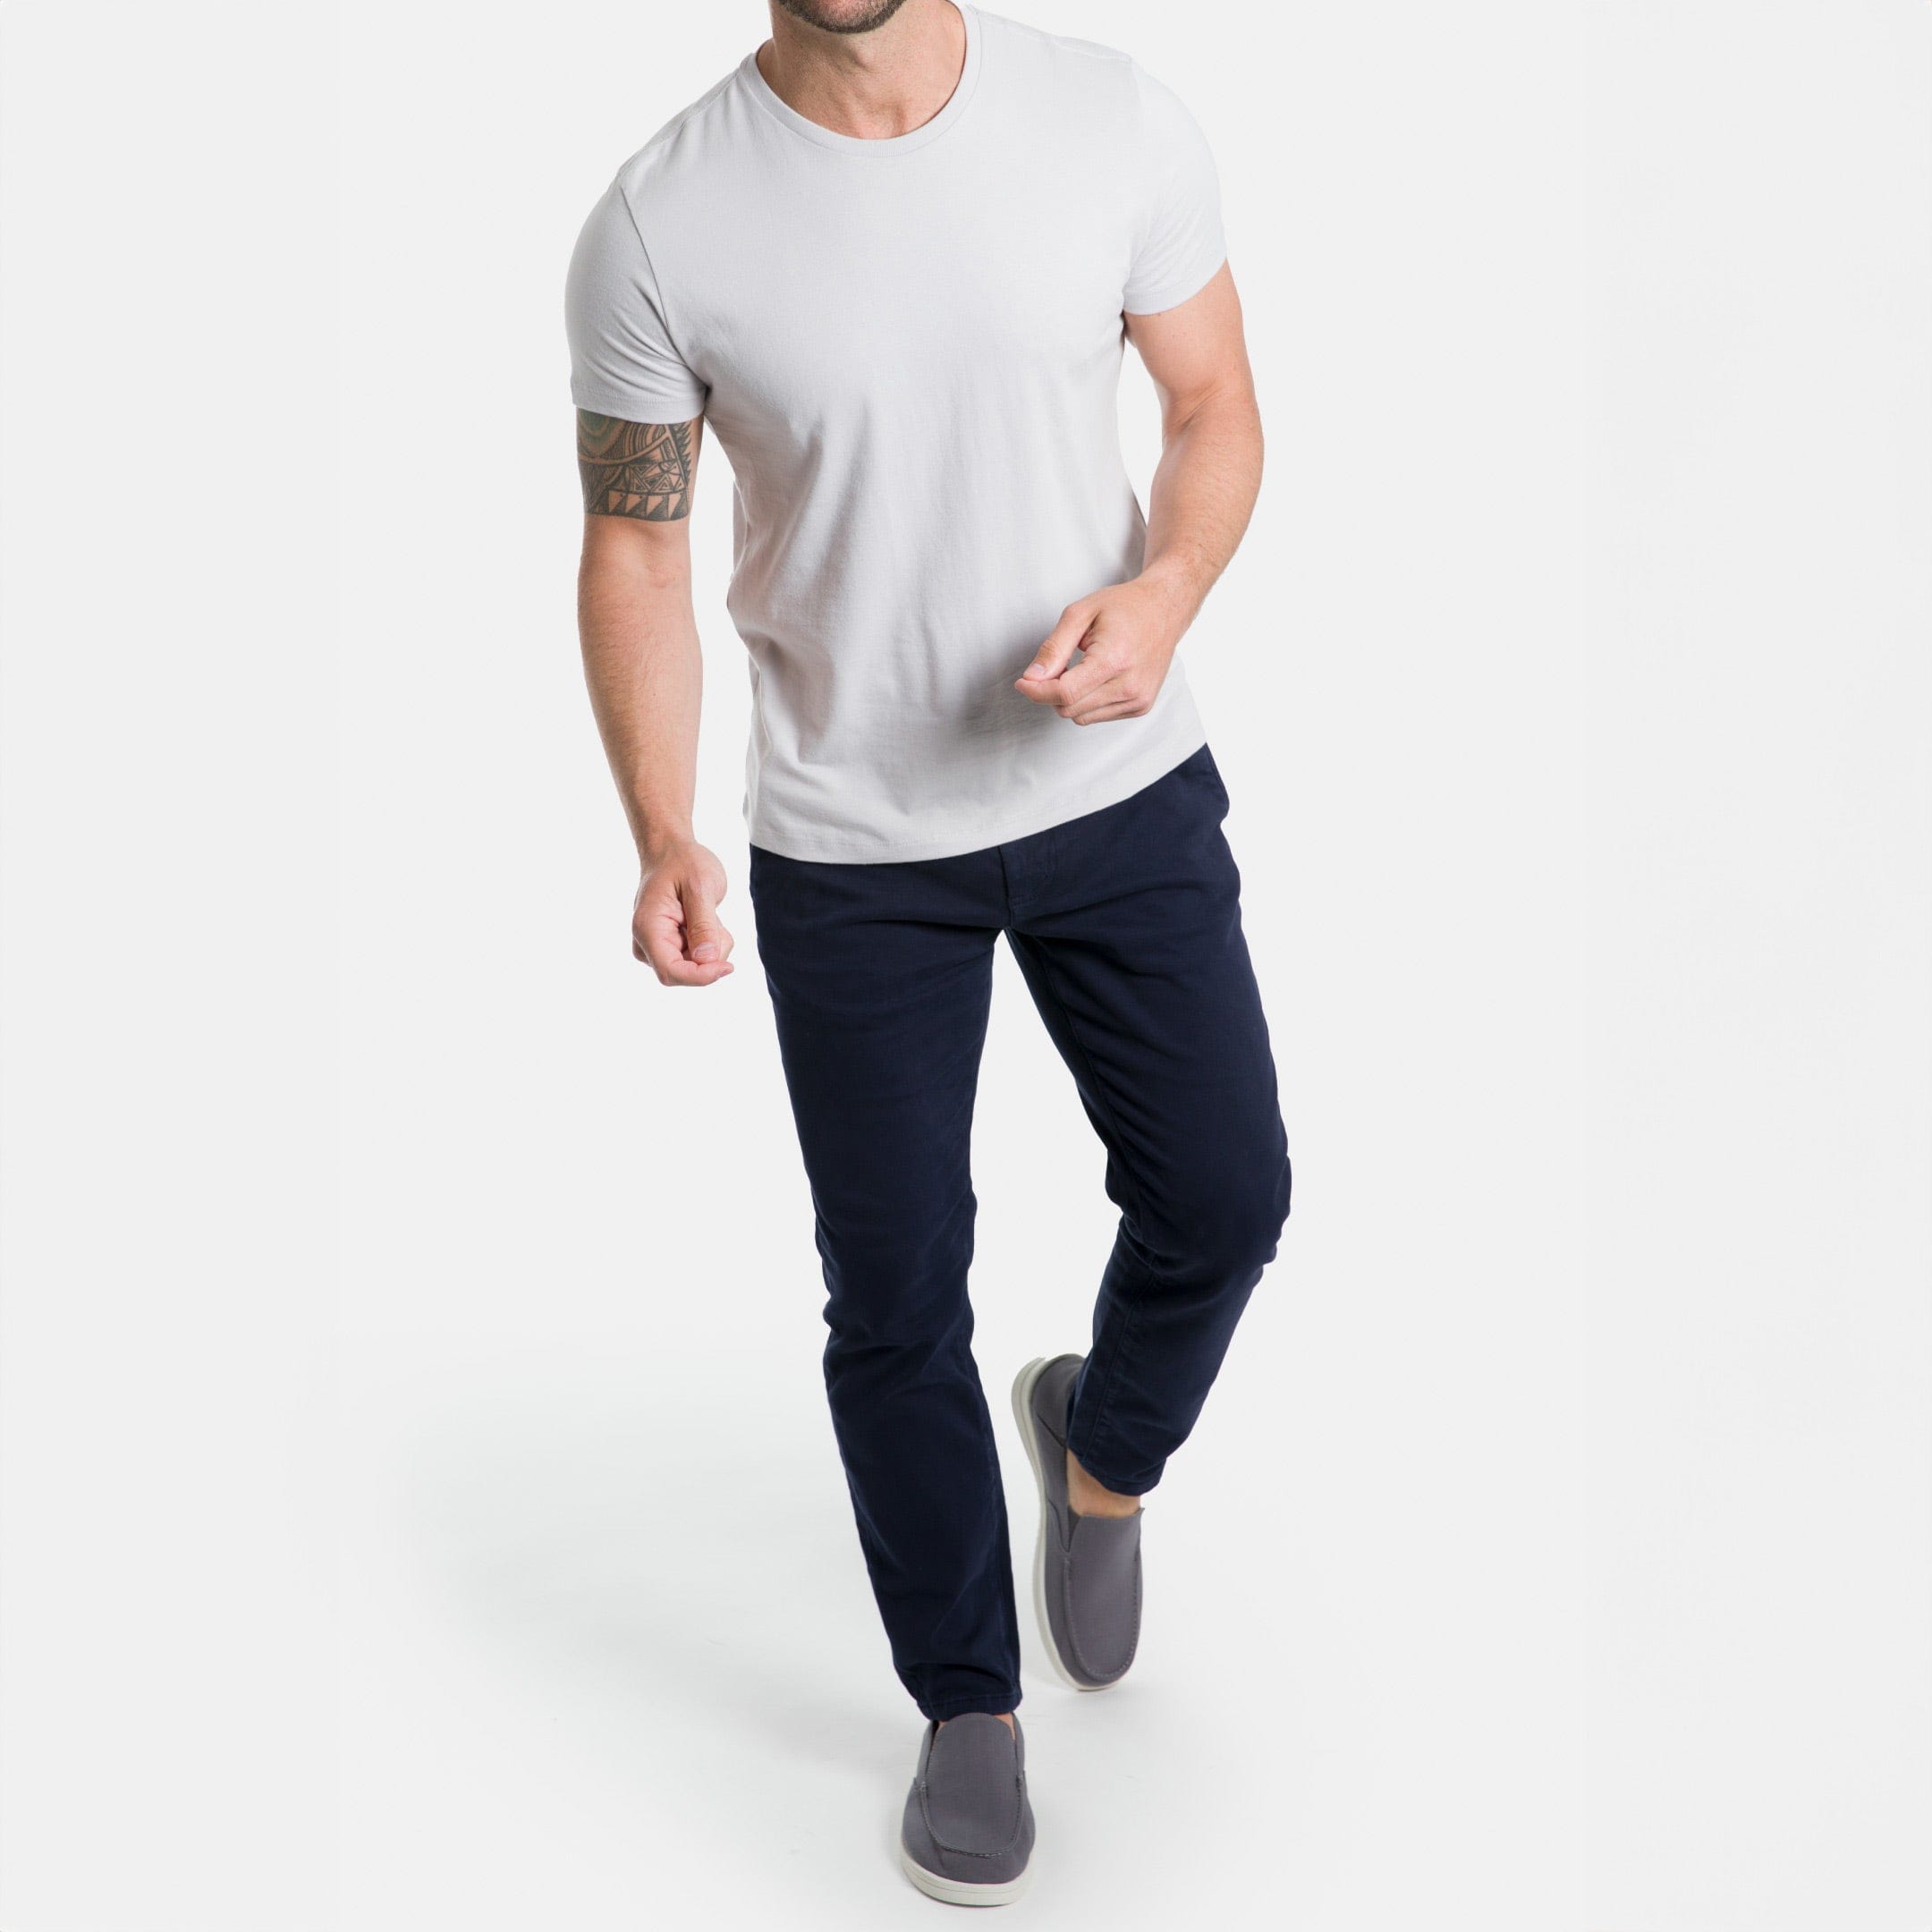 Fashion for Short Men: Rolling Up Your Sleeves – Ash & Erie